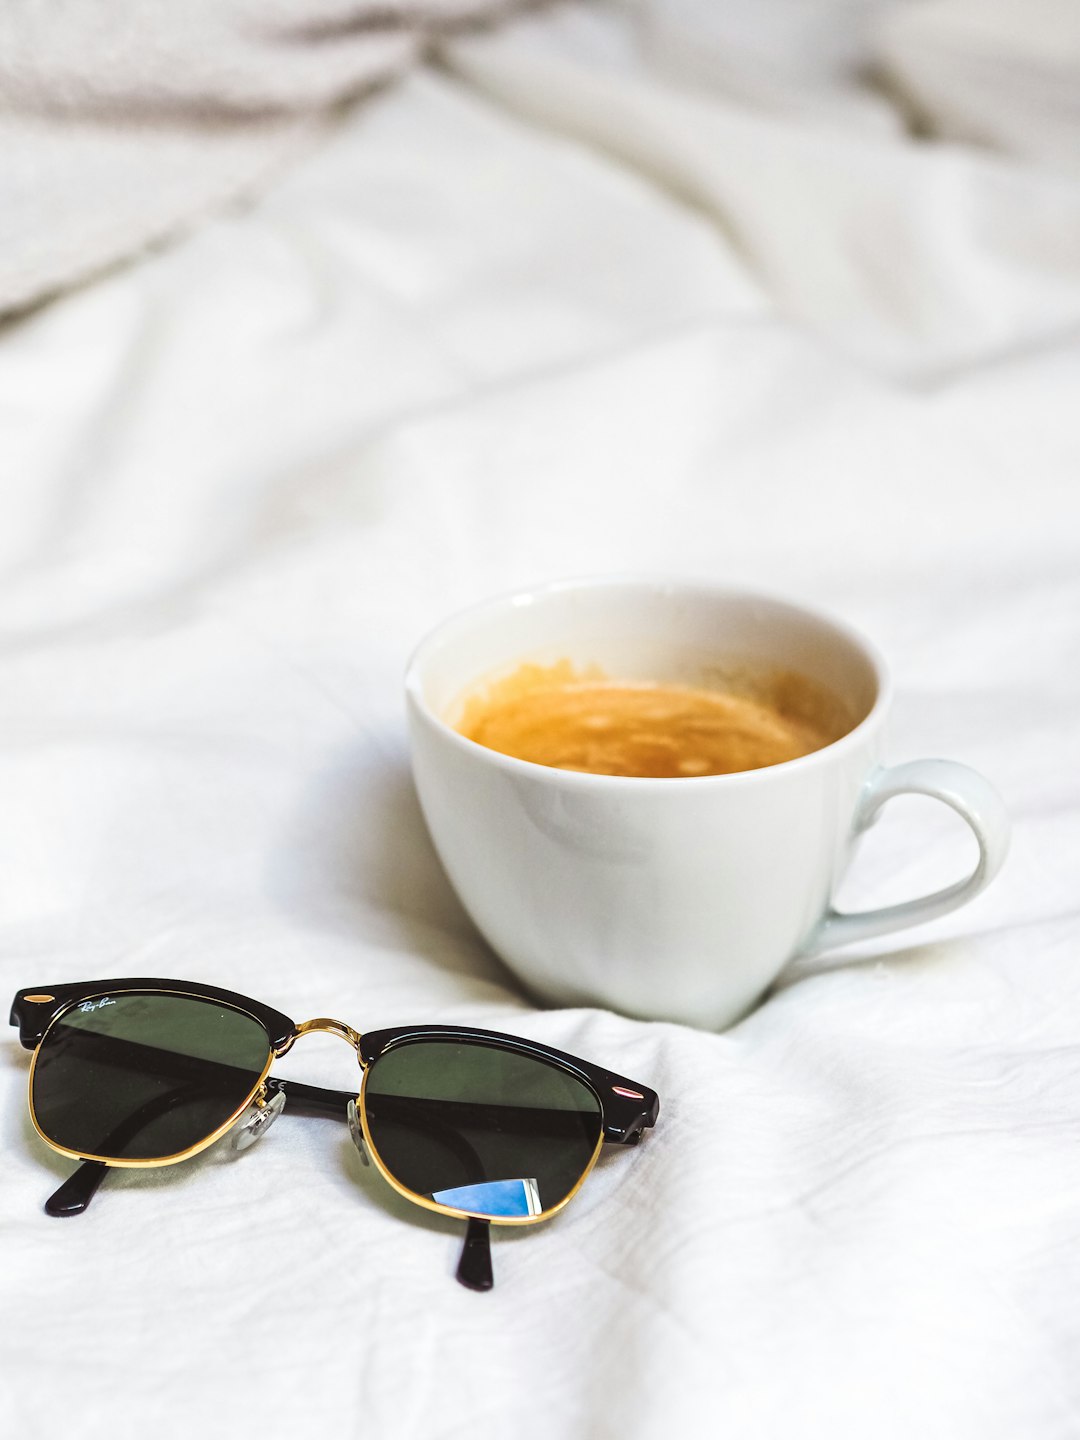 brown sunglasses beside white ceramic cup on white textile